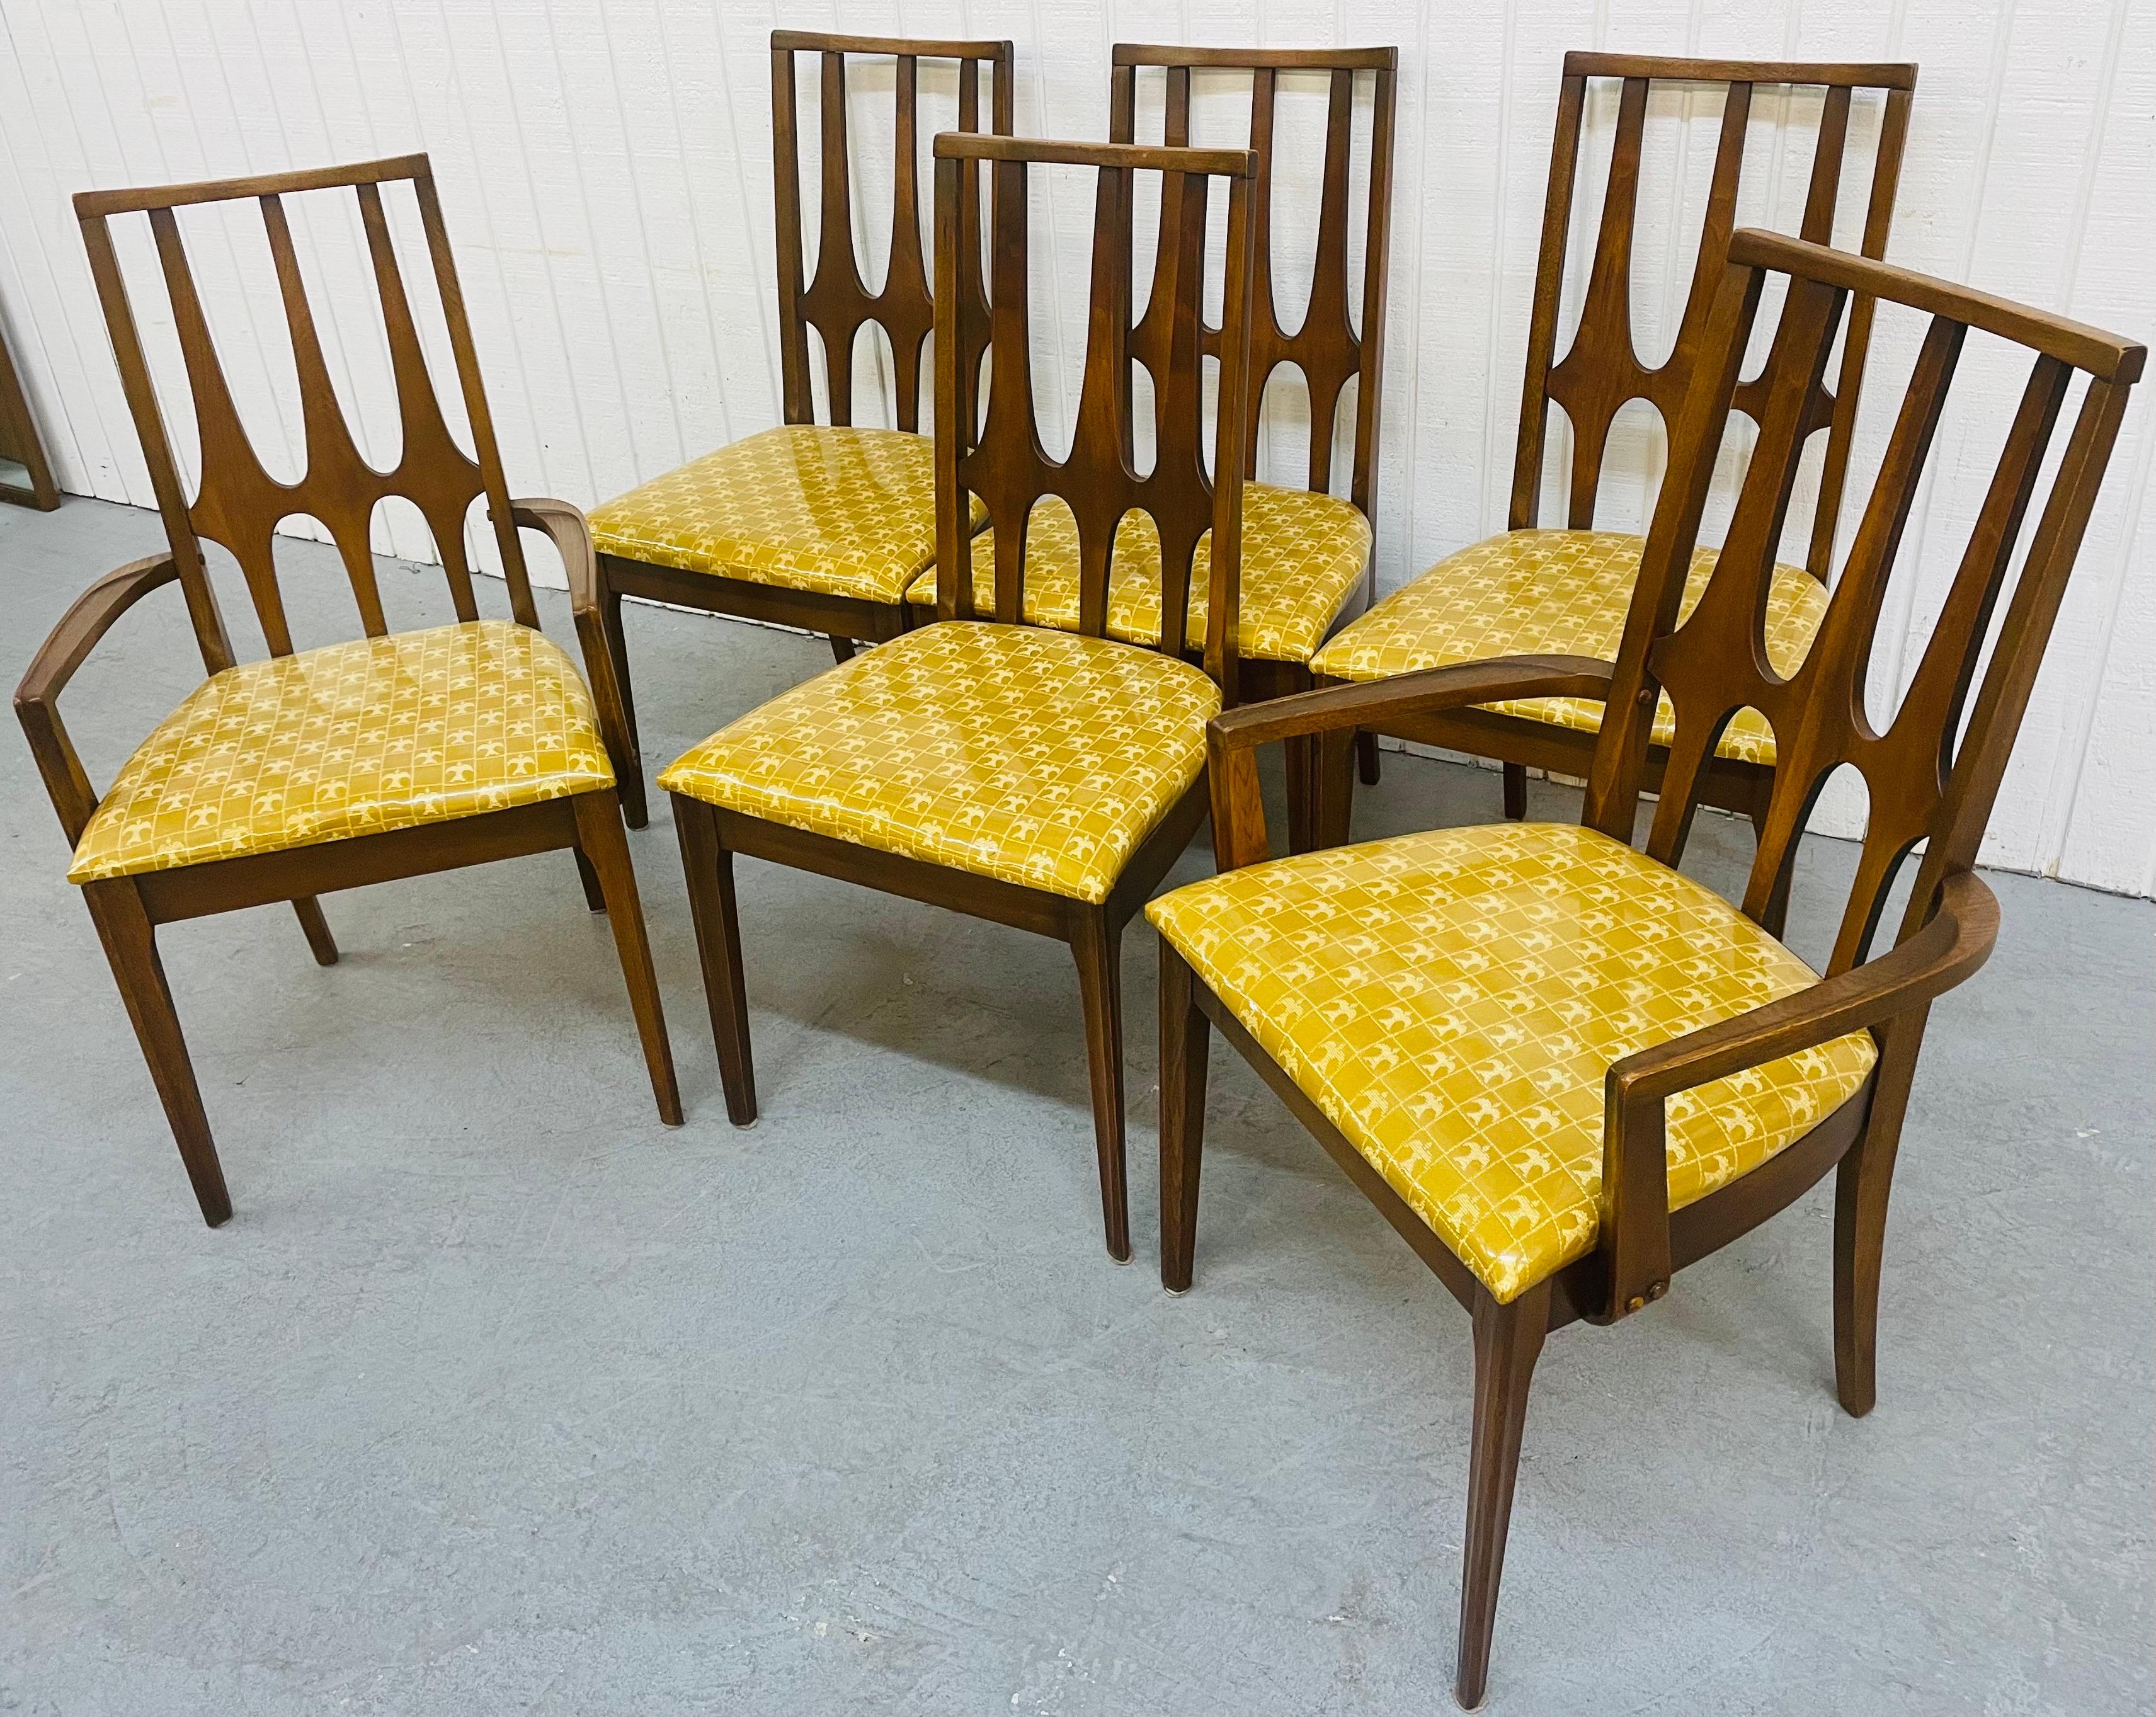 This listing is for a set of six Mid-Century Broyhill Brasilia Walnut Dining Chairs. Featuring original upholstered seats, sculpted high back rests, and a beautiful walnut finish.